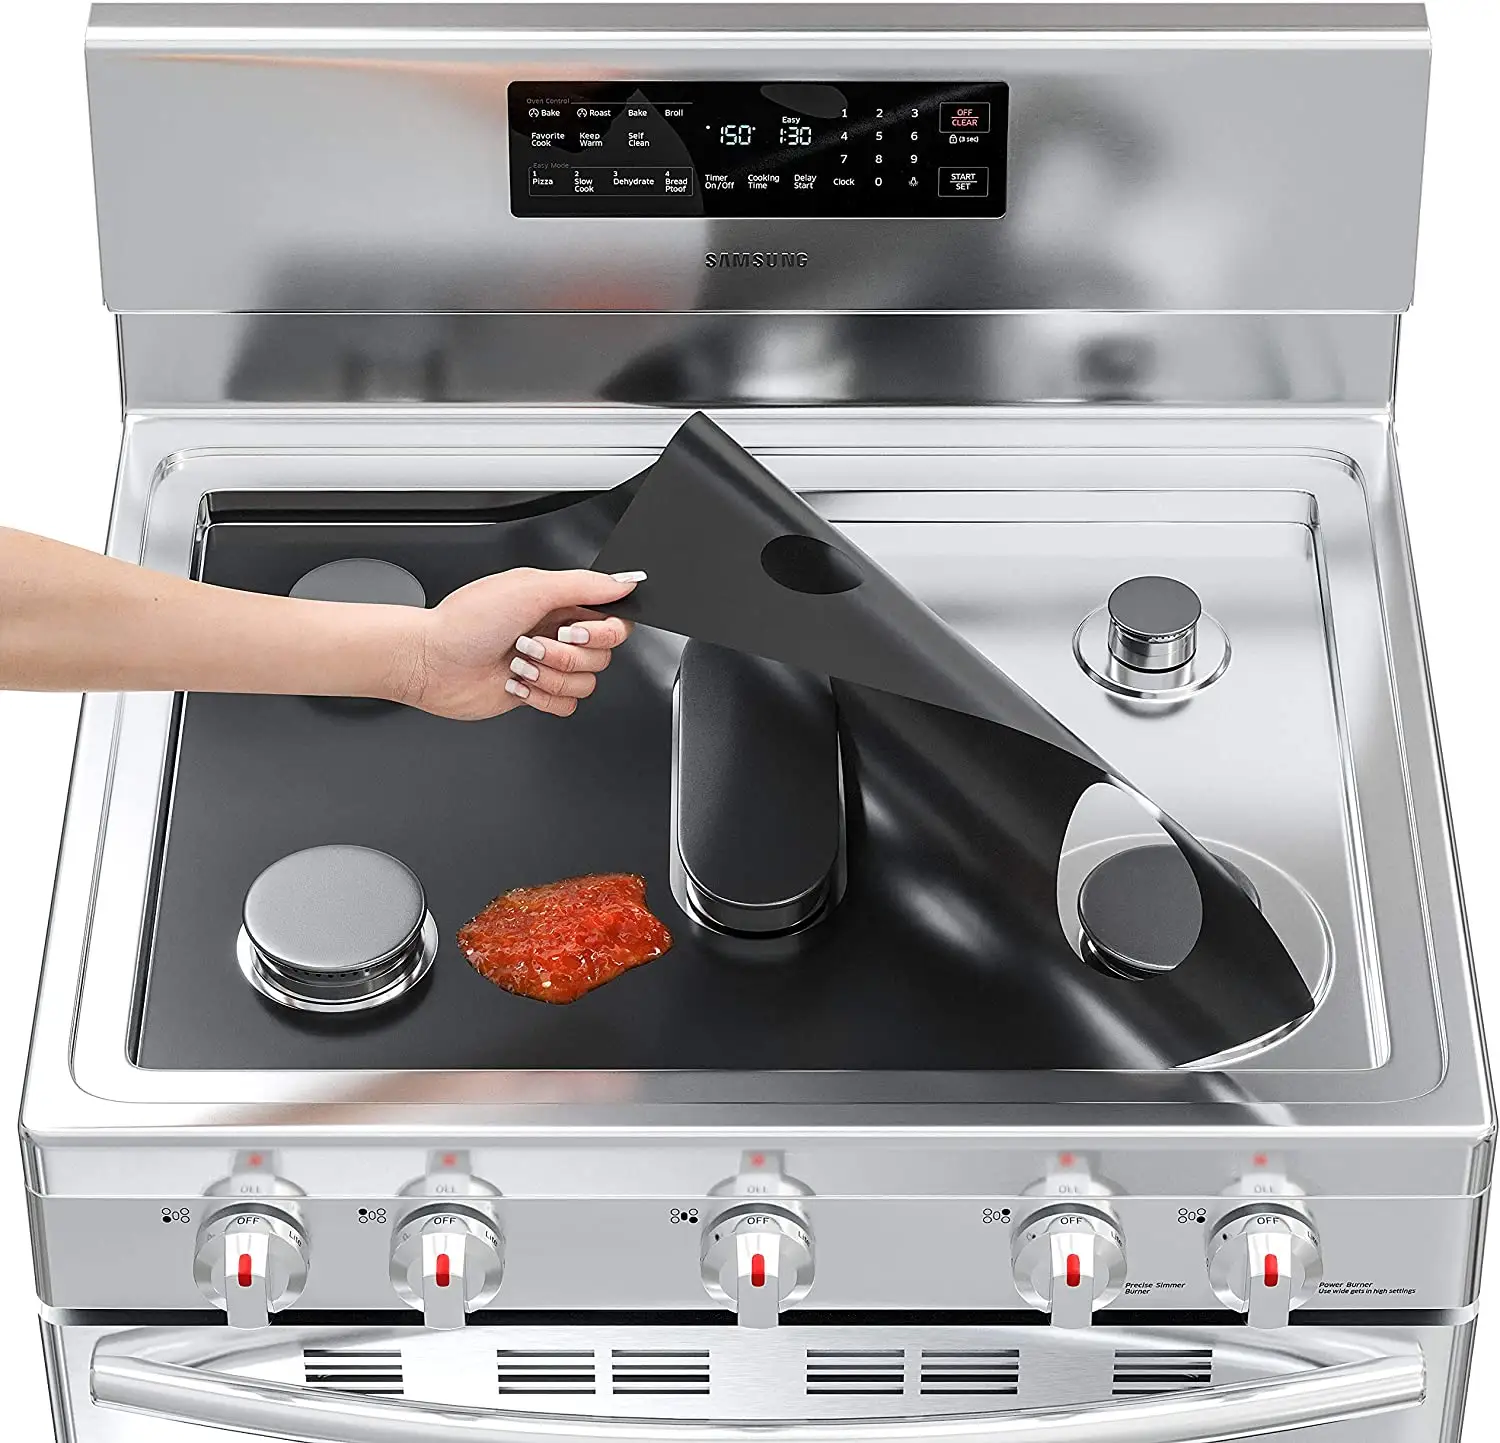 Size 30.7 x 20.8 BPA/PFOA Free Compatible with Gas Stove Burner Stove Top Cover – 30 Inch 5 Burner Covers with 2Pcs 25in Gap Covers Stove Protector Cut by Yourself freedom to Suitable Size 